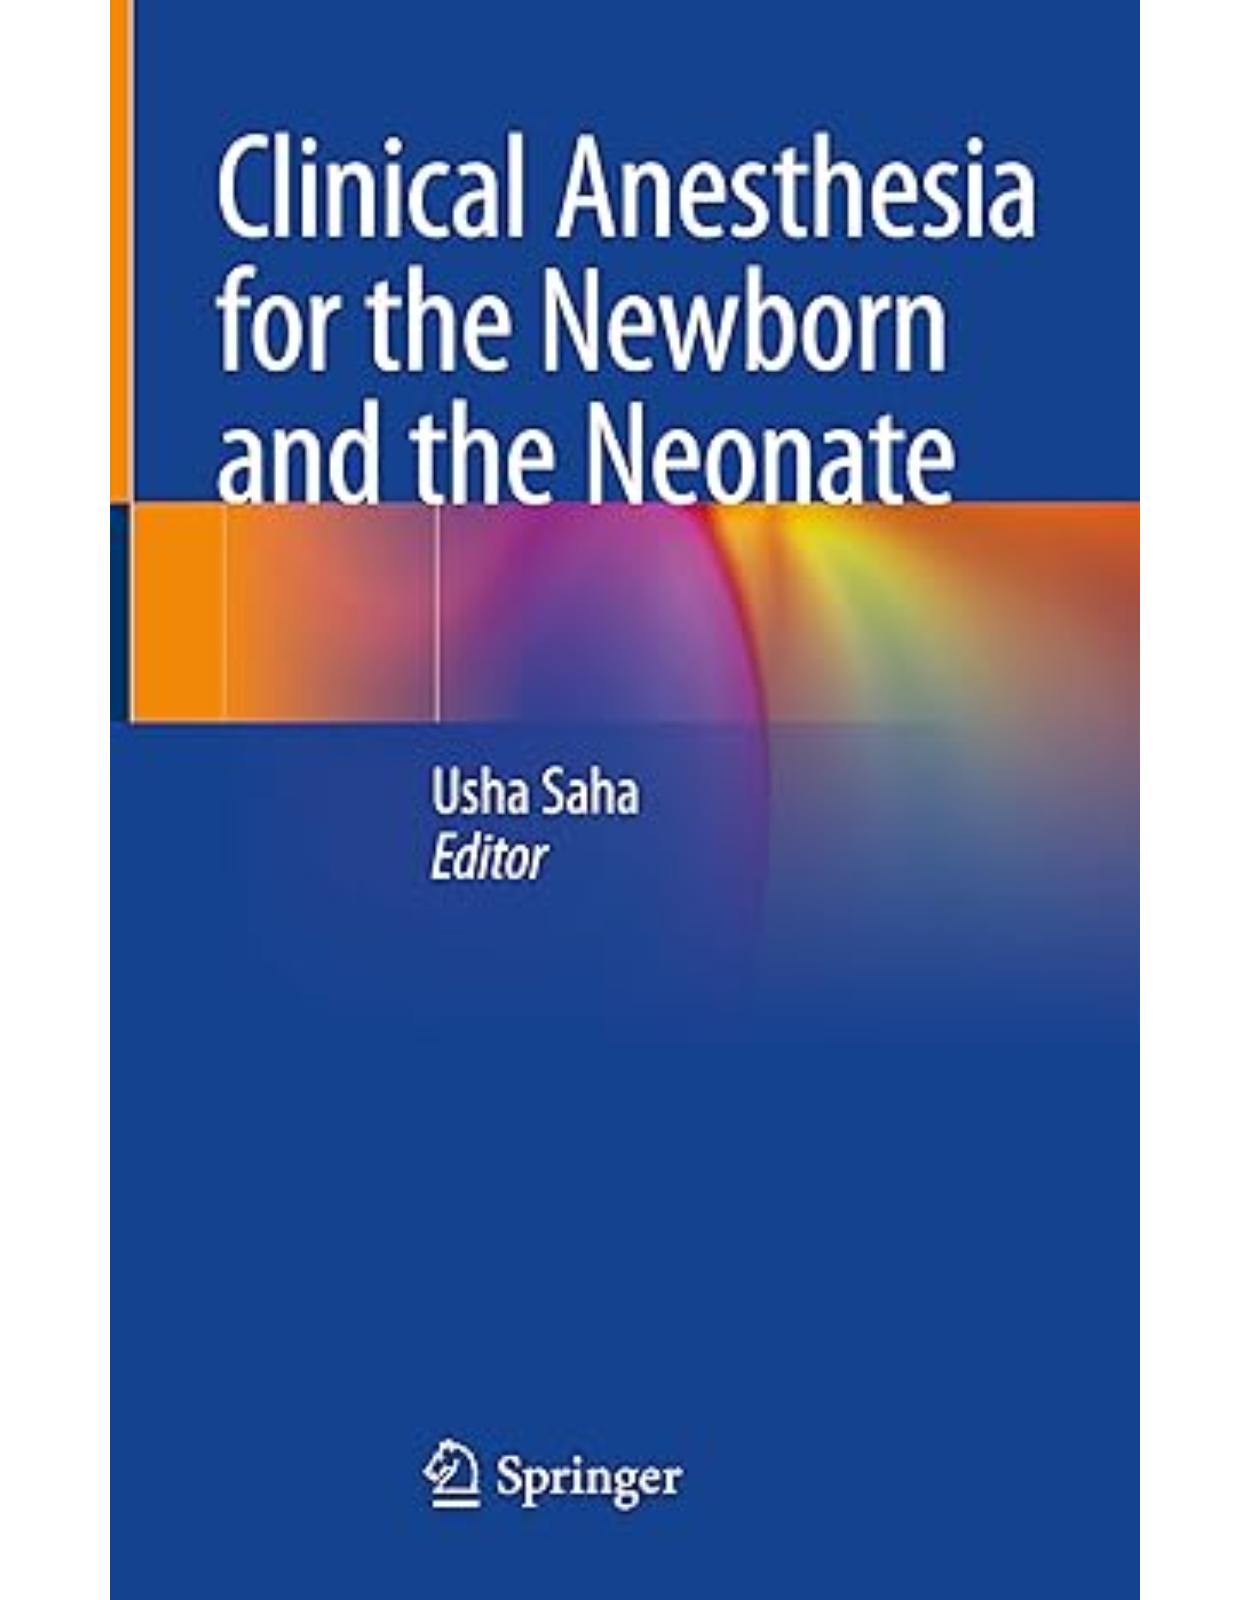 Clinical Anesthesia for the Newborn and the Neonate